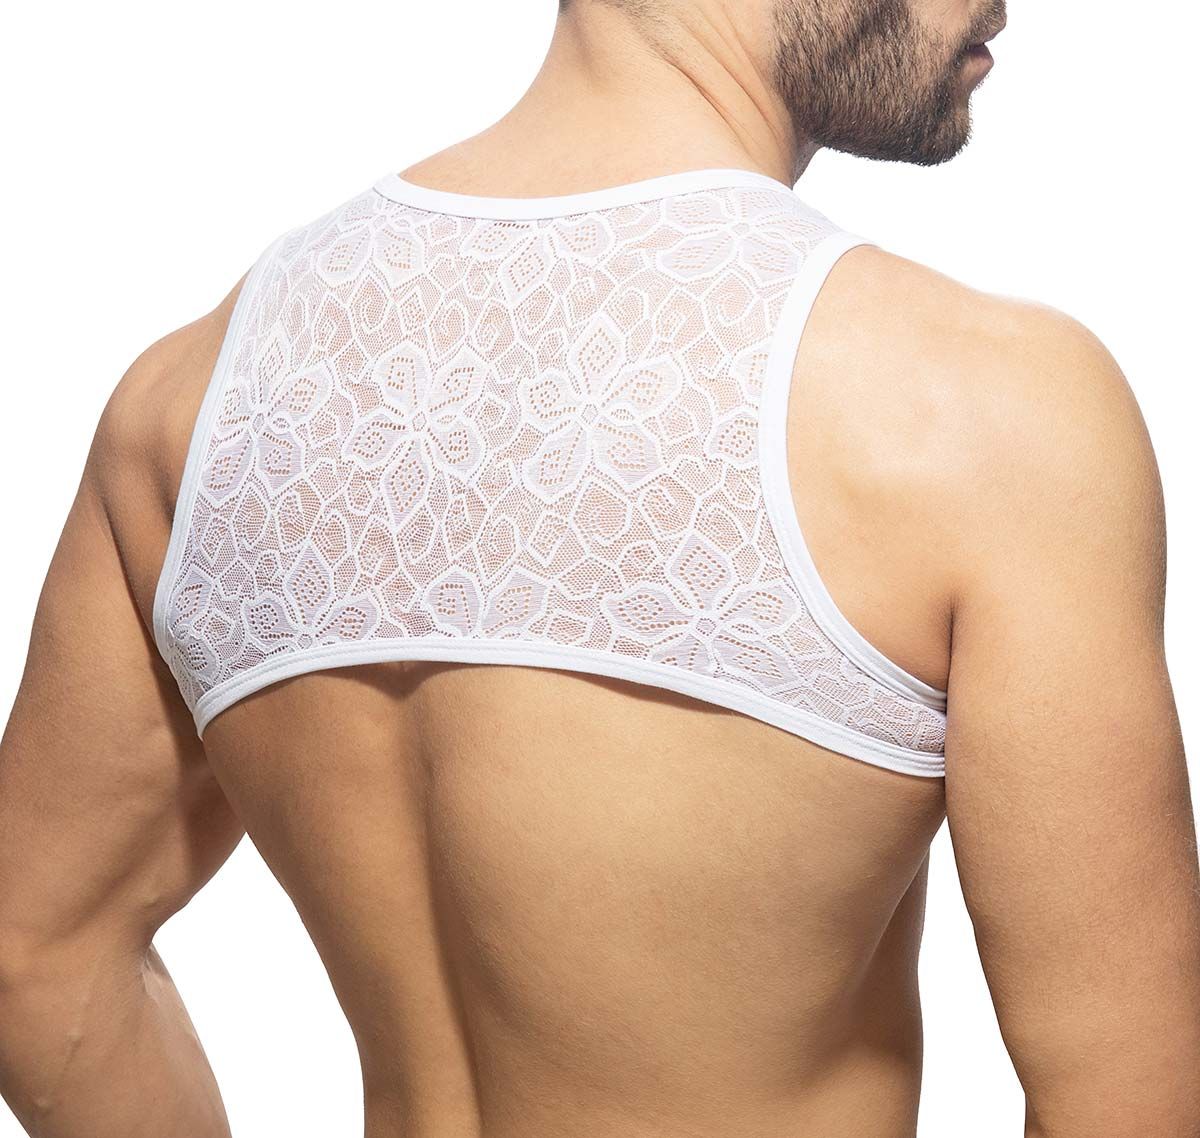 Addicted Harness FLOWERY LACE HARNESS AD1173, white